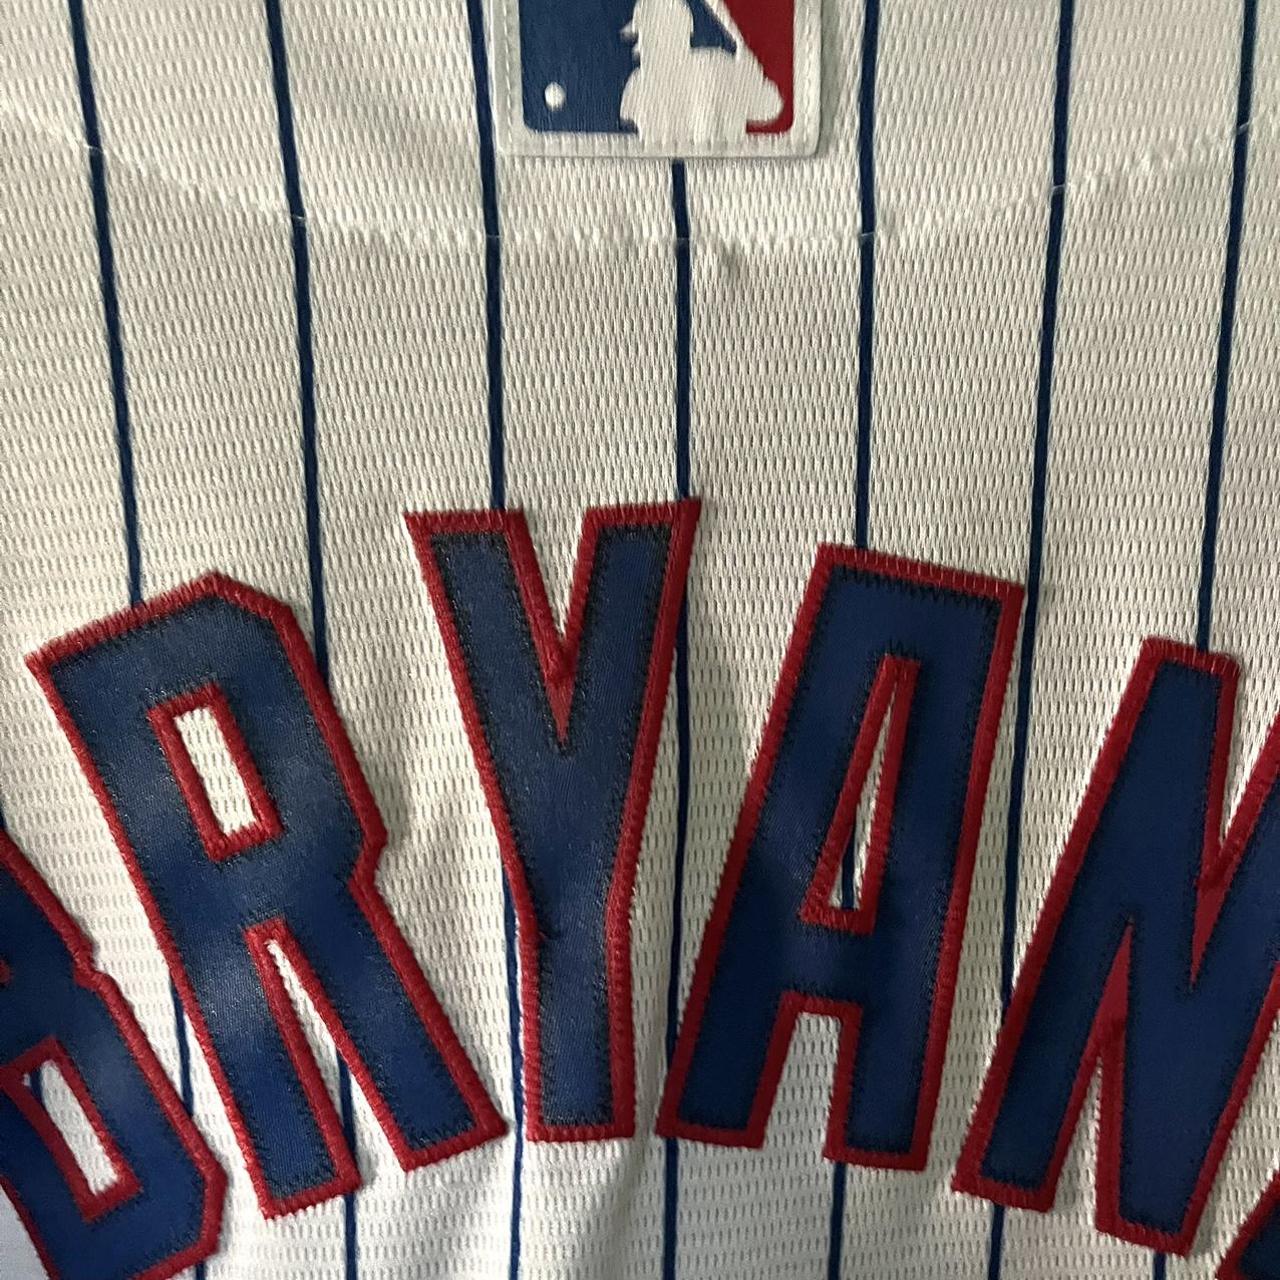 Chicago Cubs MLB JERSEY Kris Bryant. Size Youth - Depop